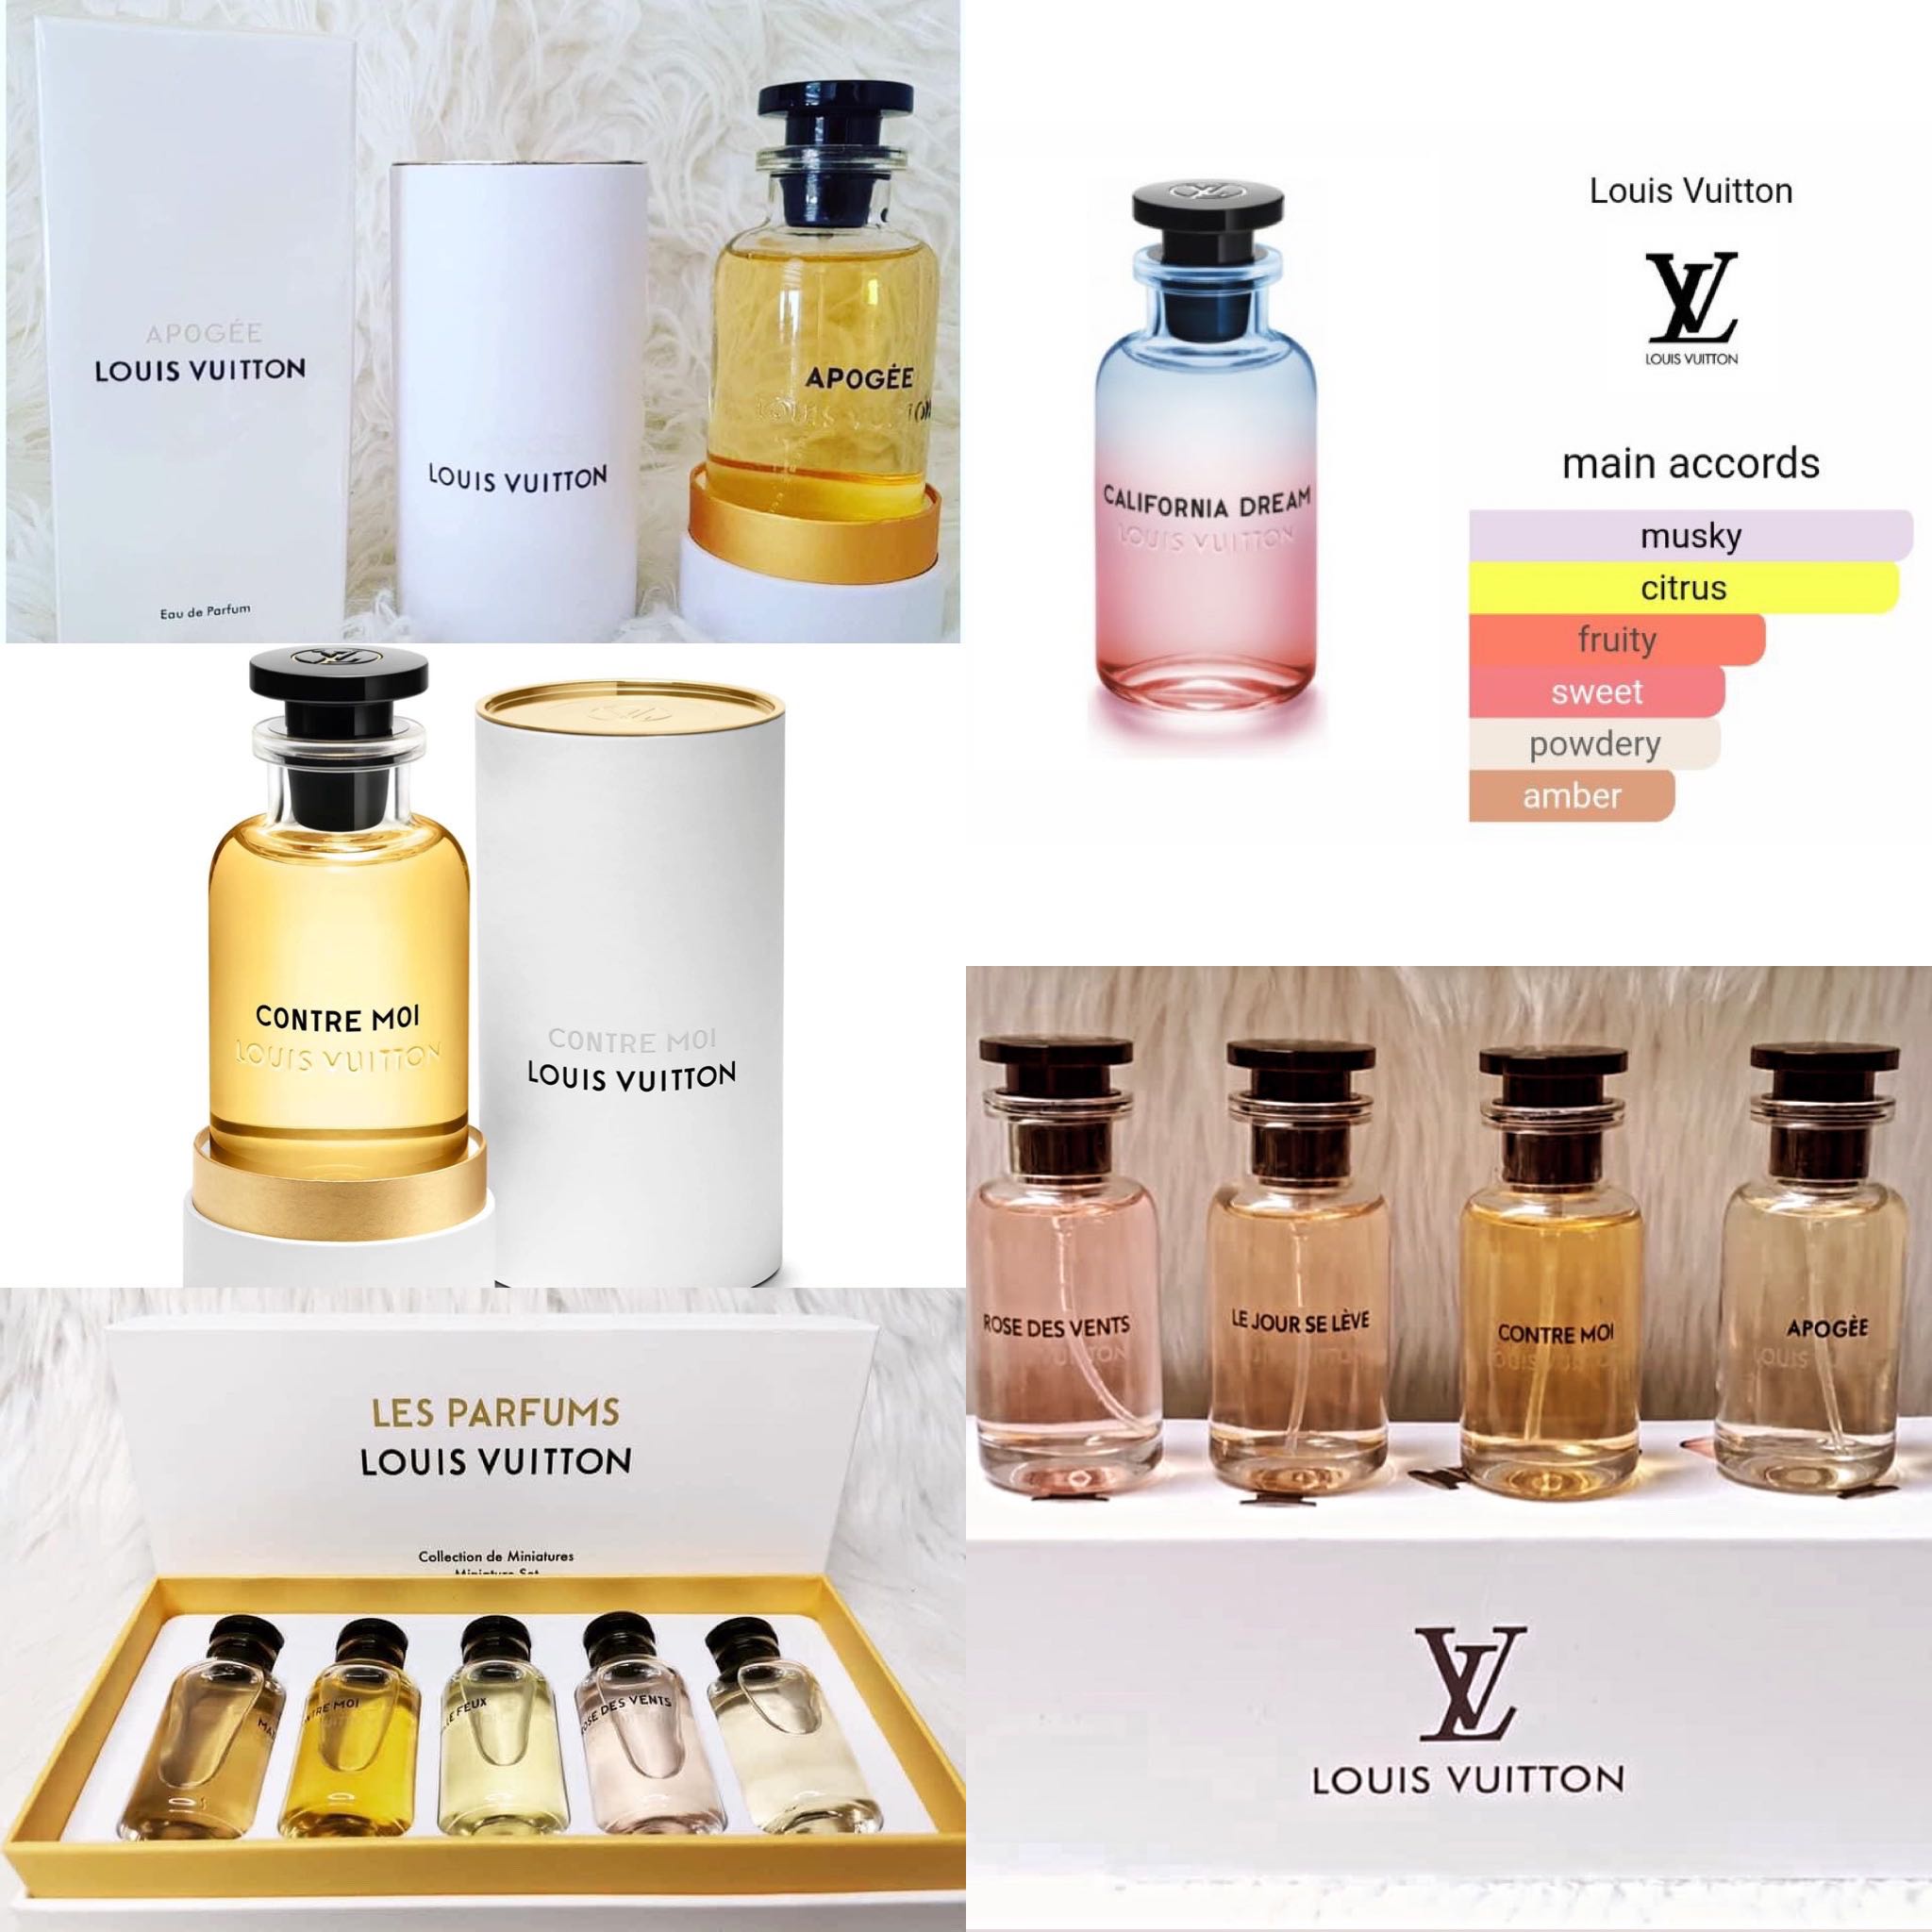 ORIGINAL] AUTHENTIC READY STOCK LOUIS VUITTON L'IMMENSITE EDP 100ML PERFUME  FOR HIM, Beauty & Personal Care, Fragrance & Deodorants on Carousell